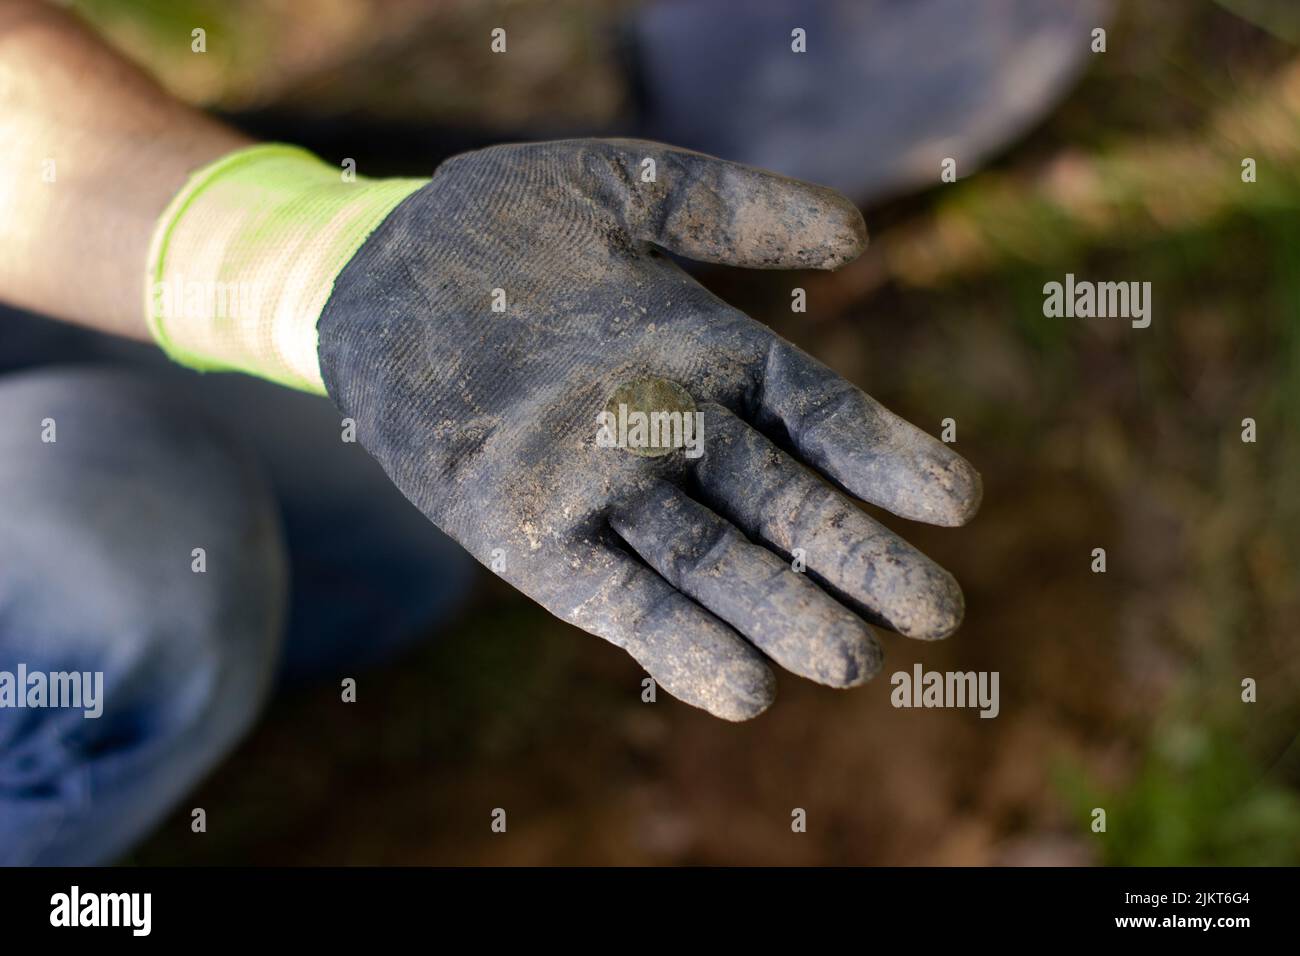 https://c8.alamy.com/comp/2JKT6G4/in-the-palm-of-a-glove-lies-an-old-coin-found-in-the-ground-in-a-park-using-a-wireless-metal-detector-2JKT6G4.jpg